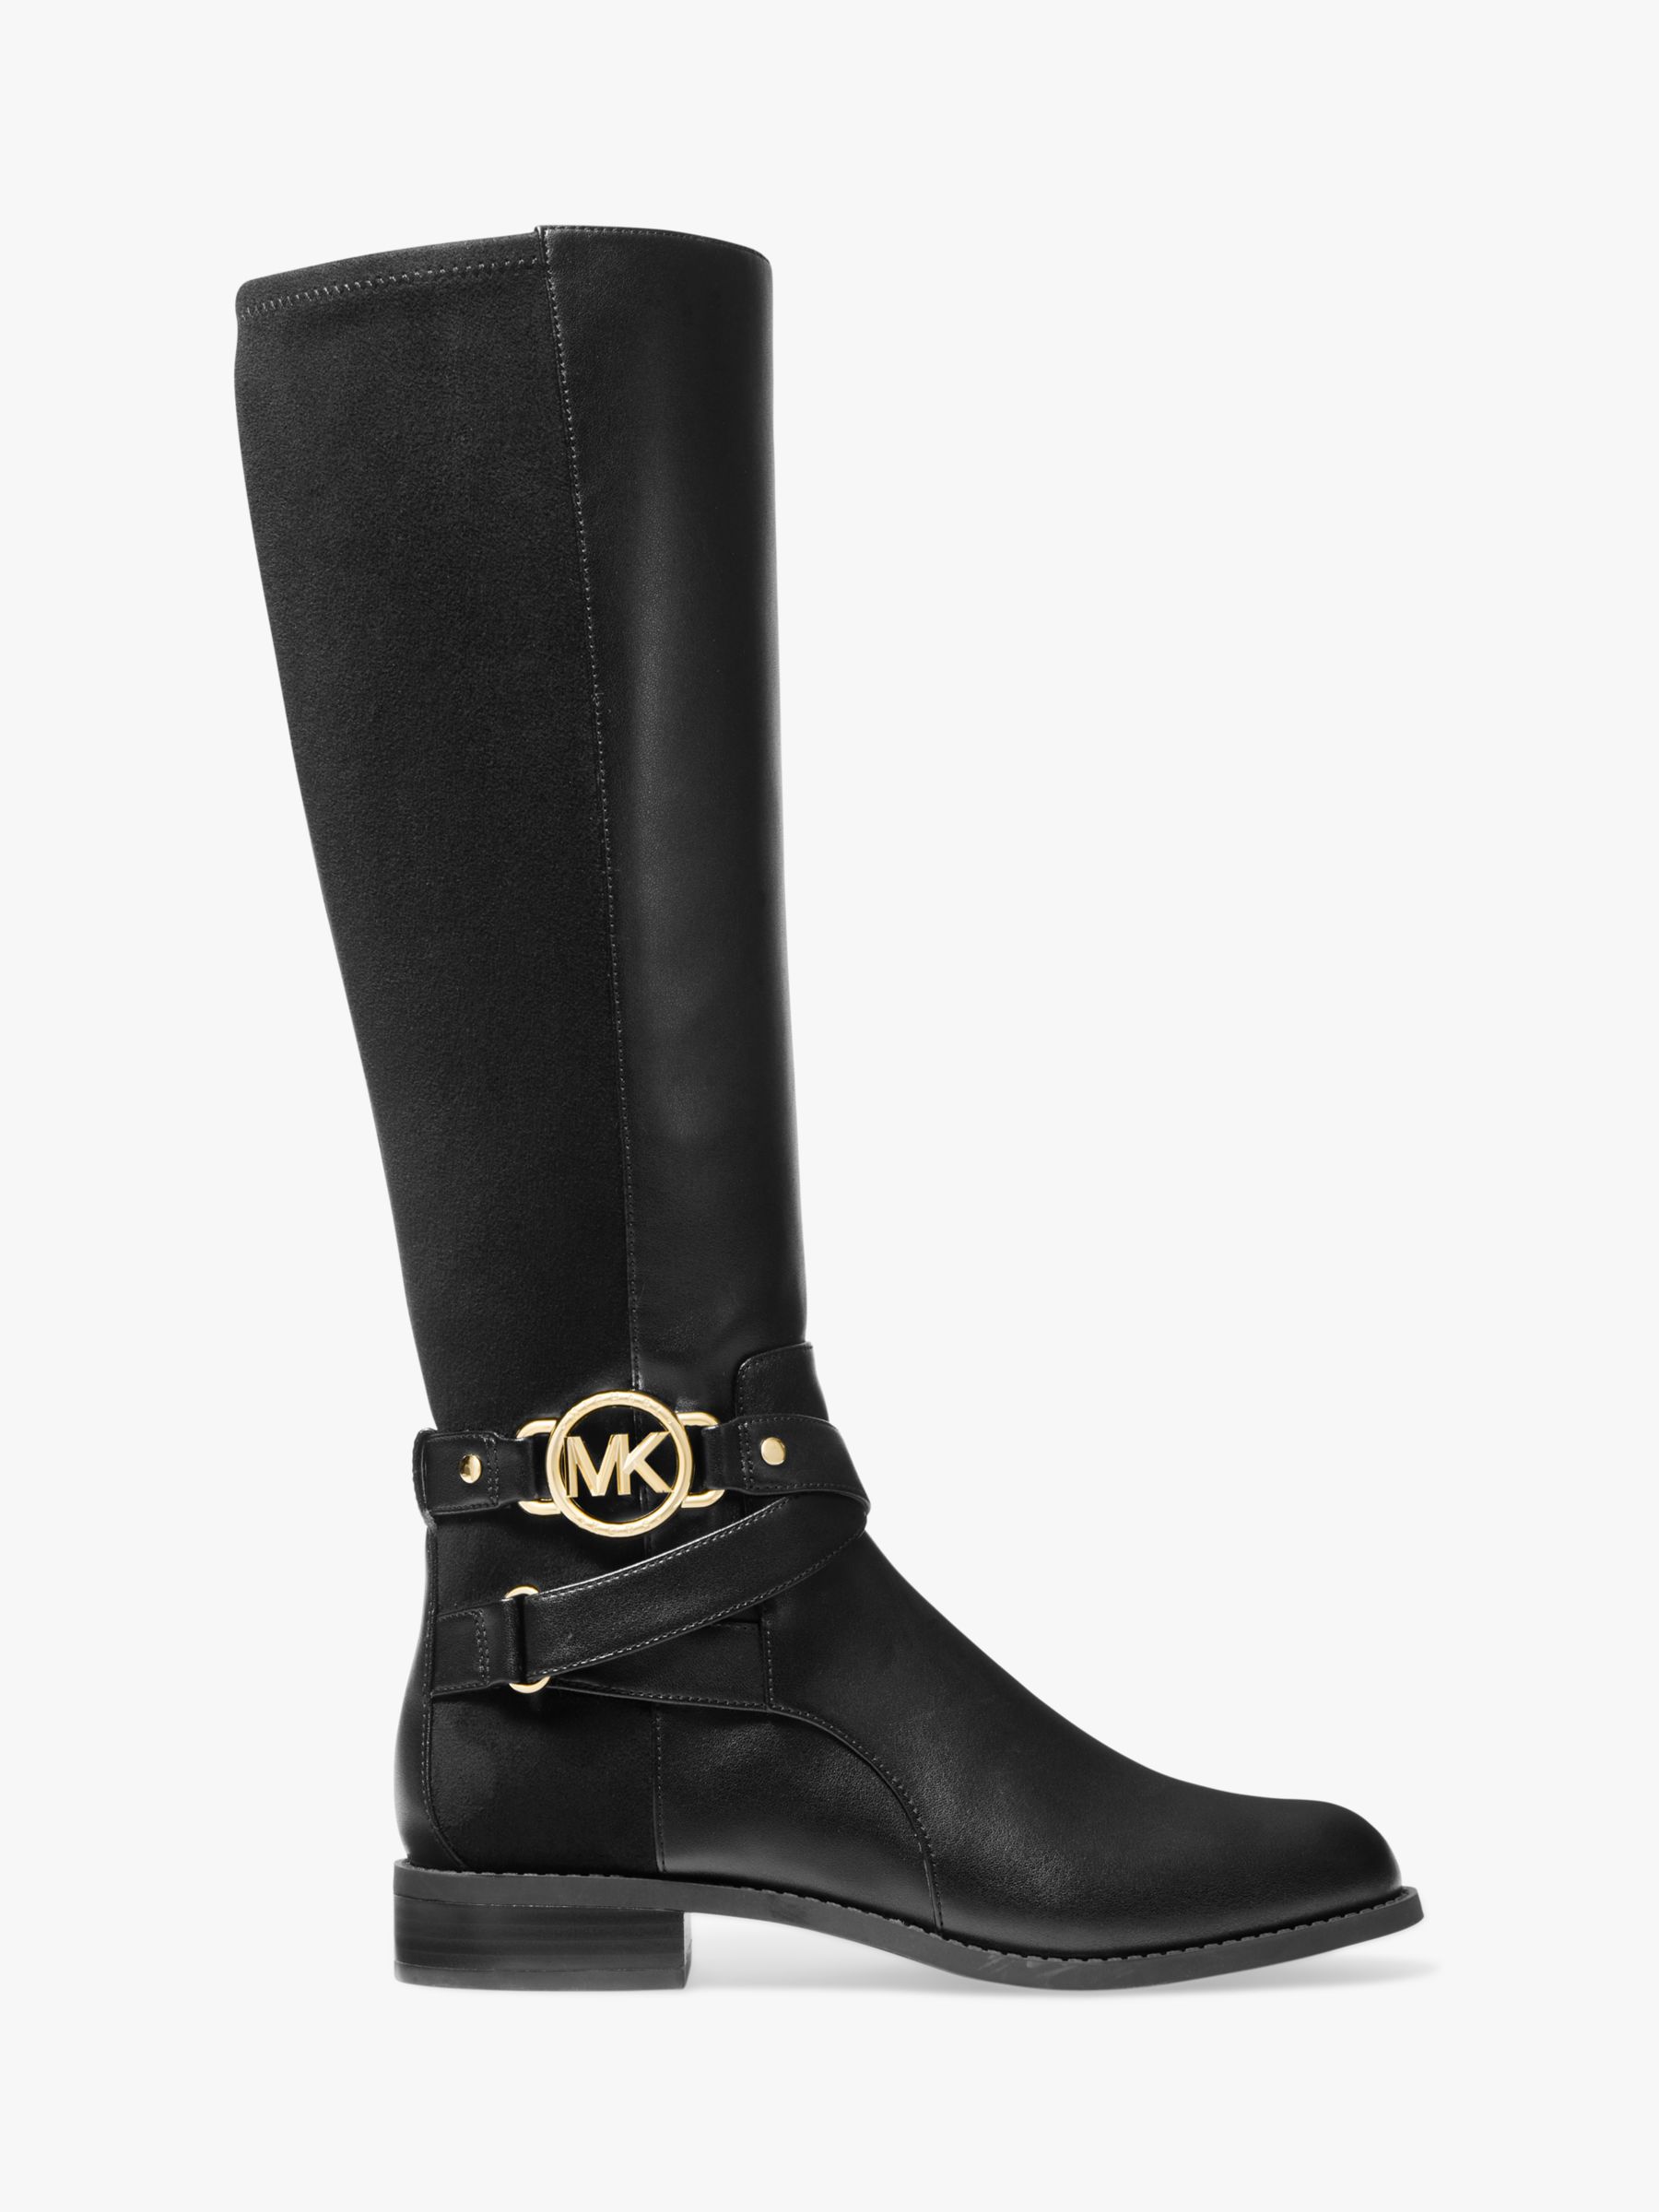 Michael Kors Rory Leather Knee High Boots, Black